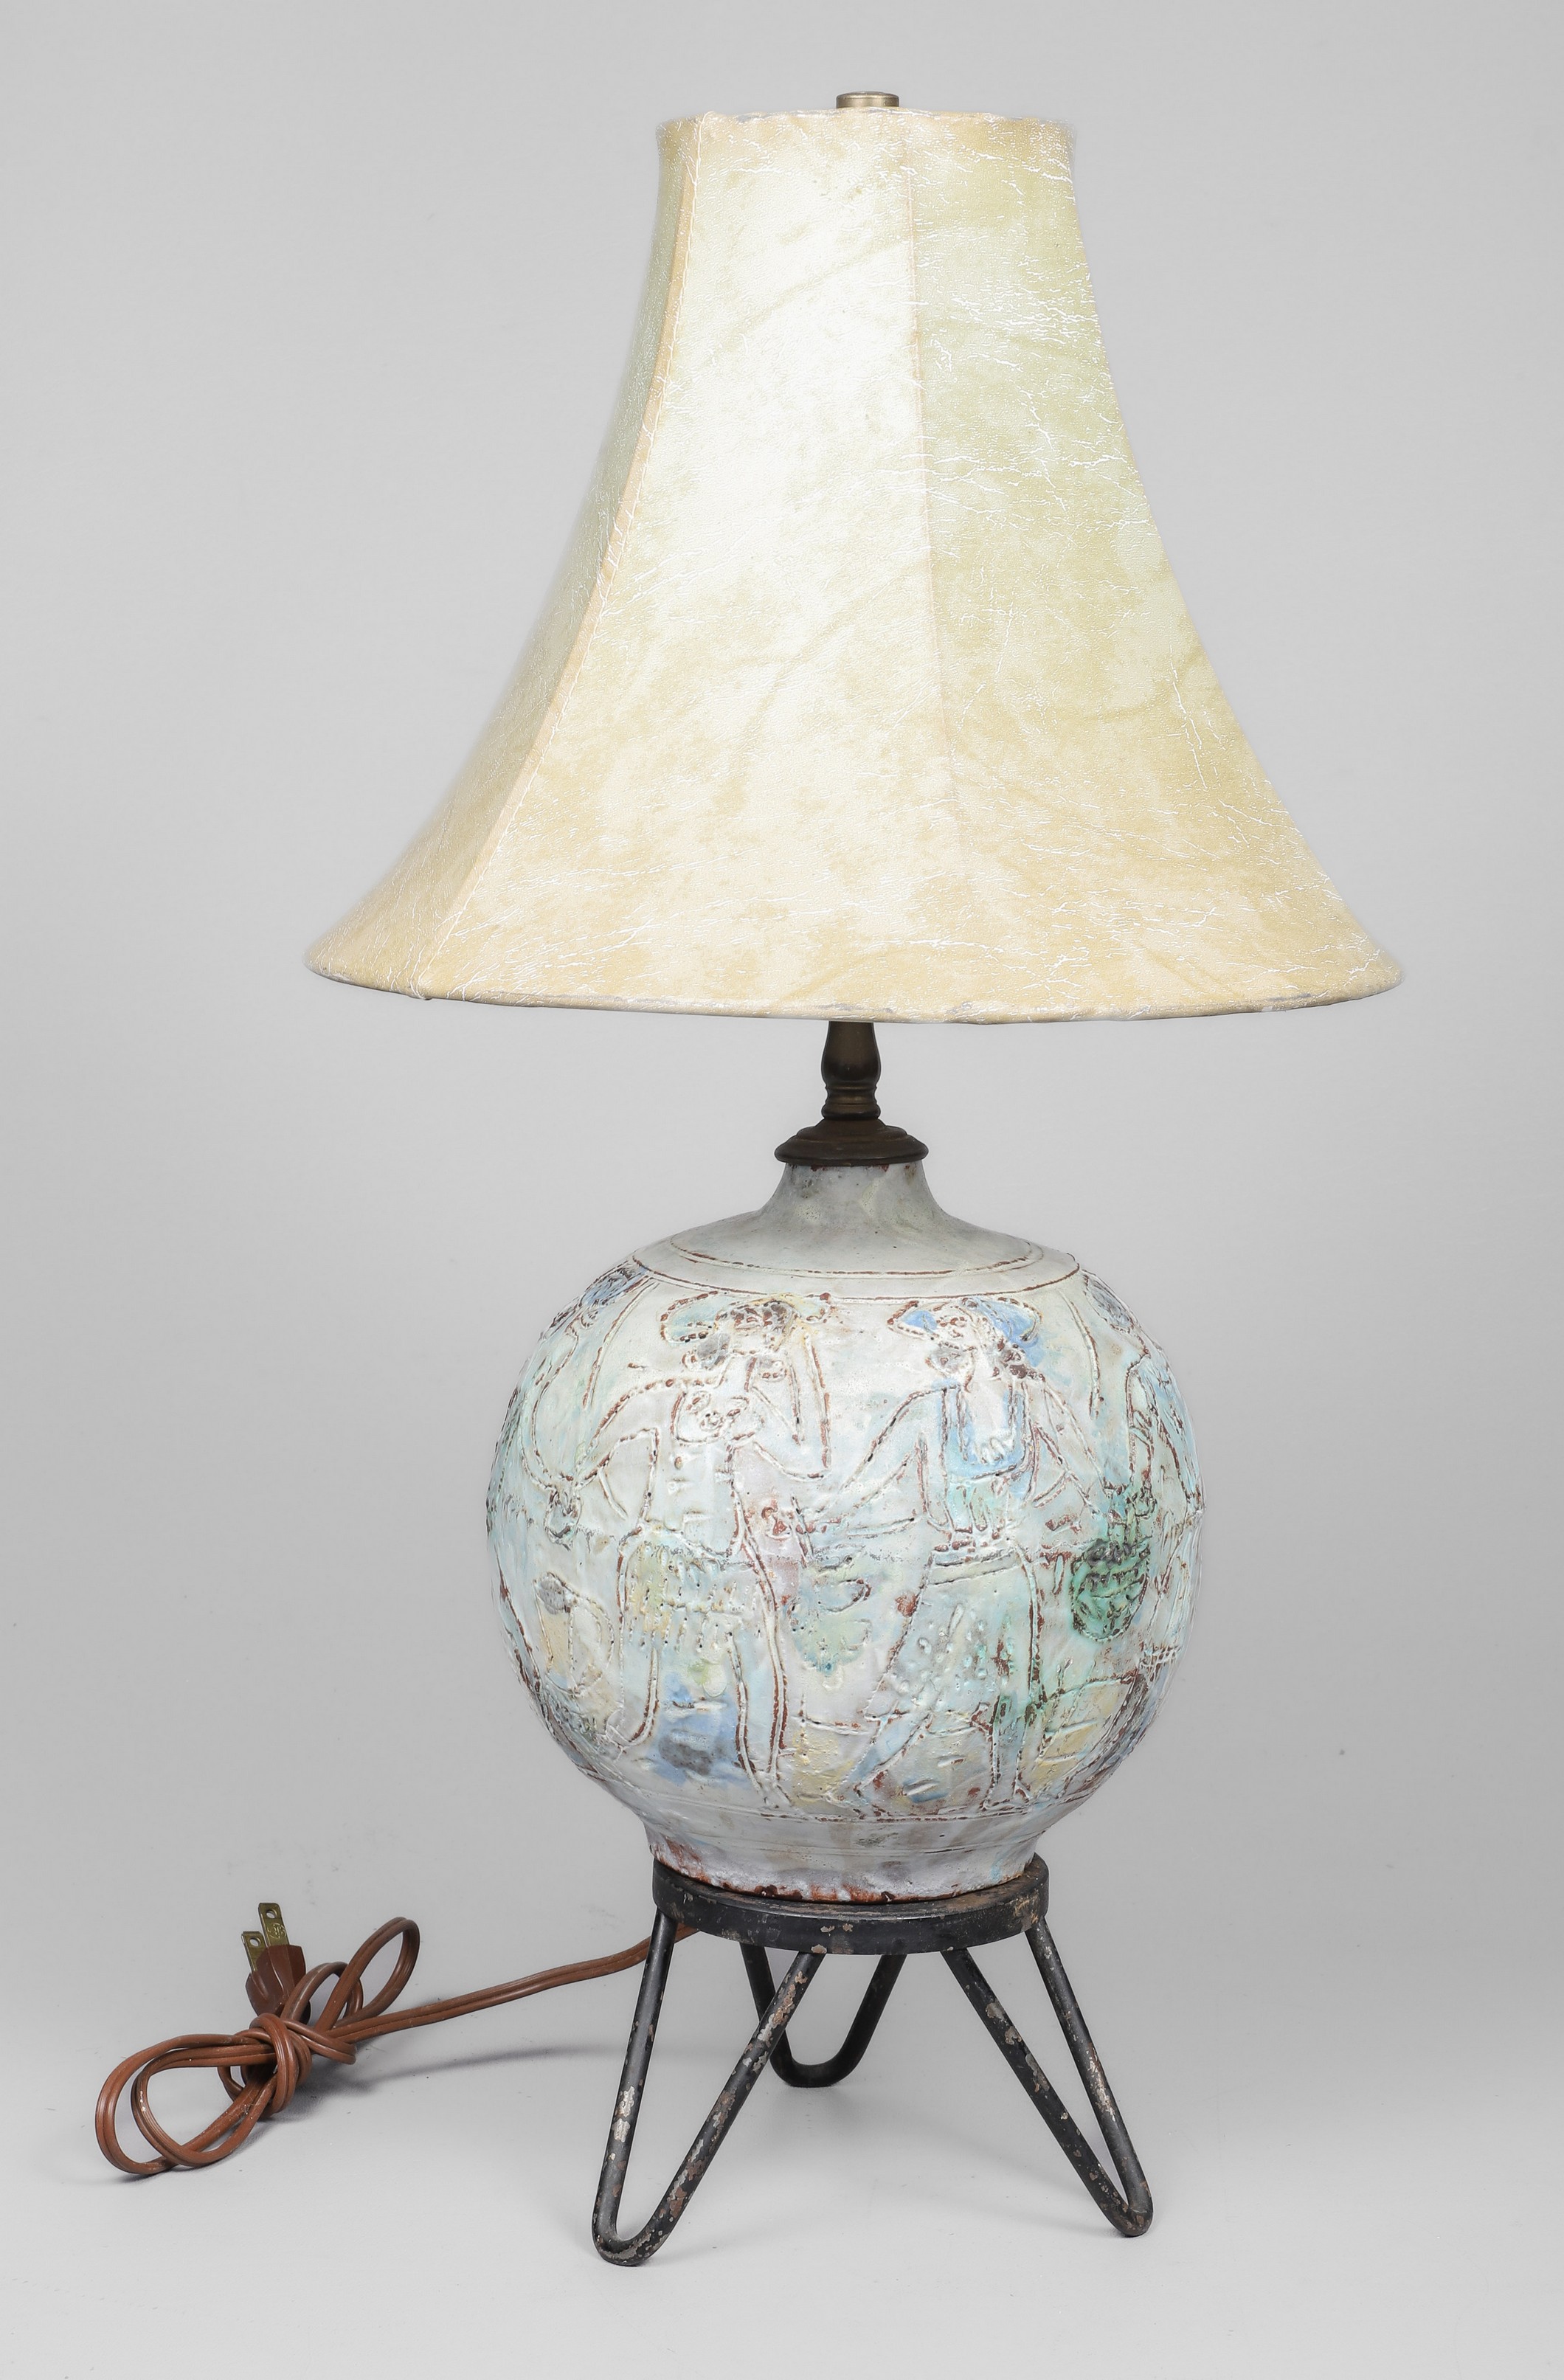 Art pottery table lamp, incised figural